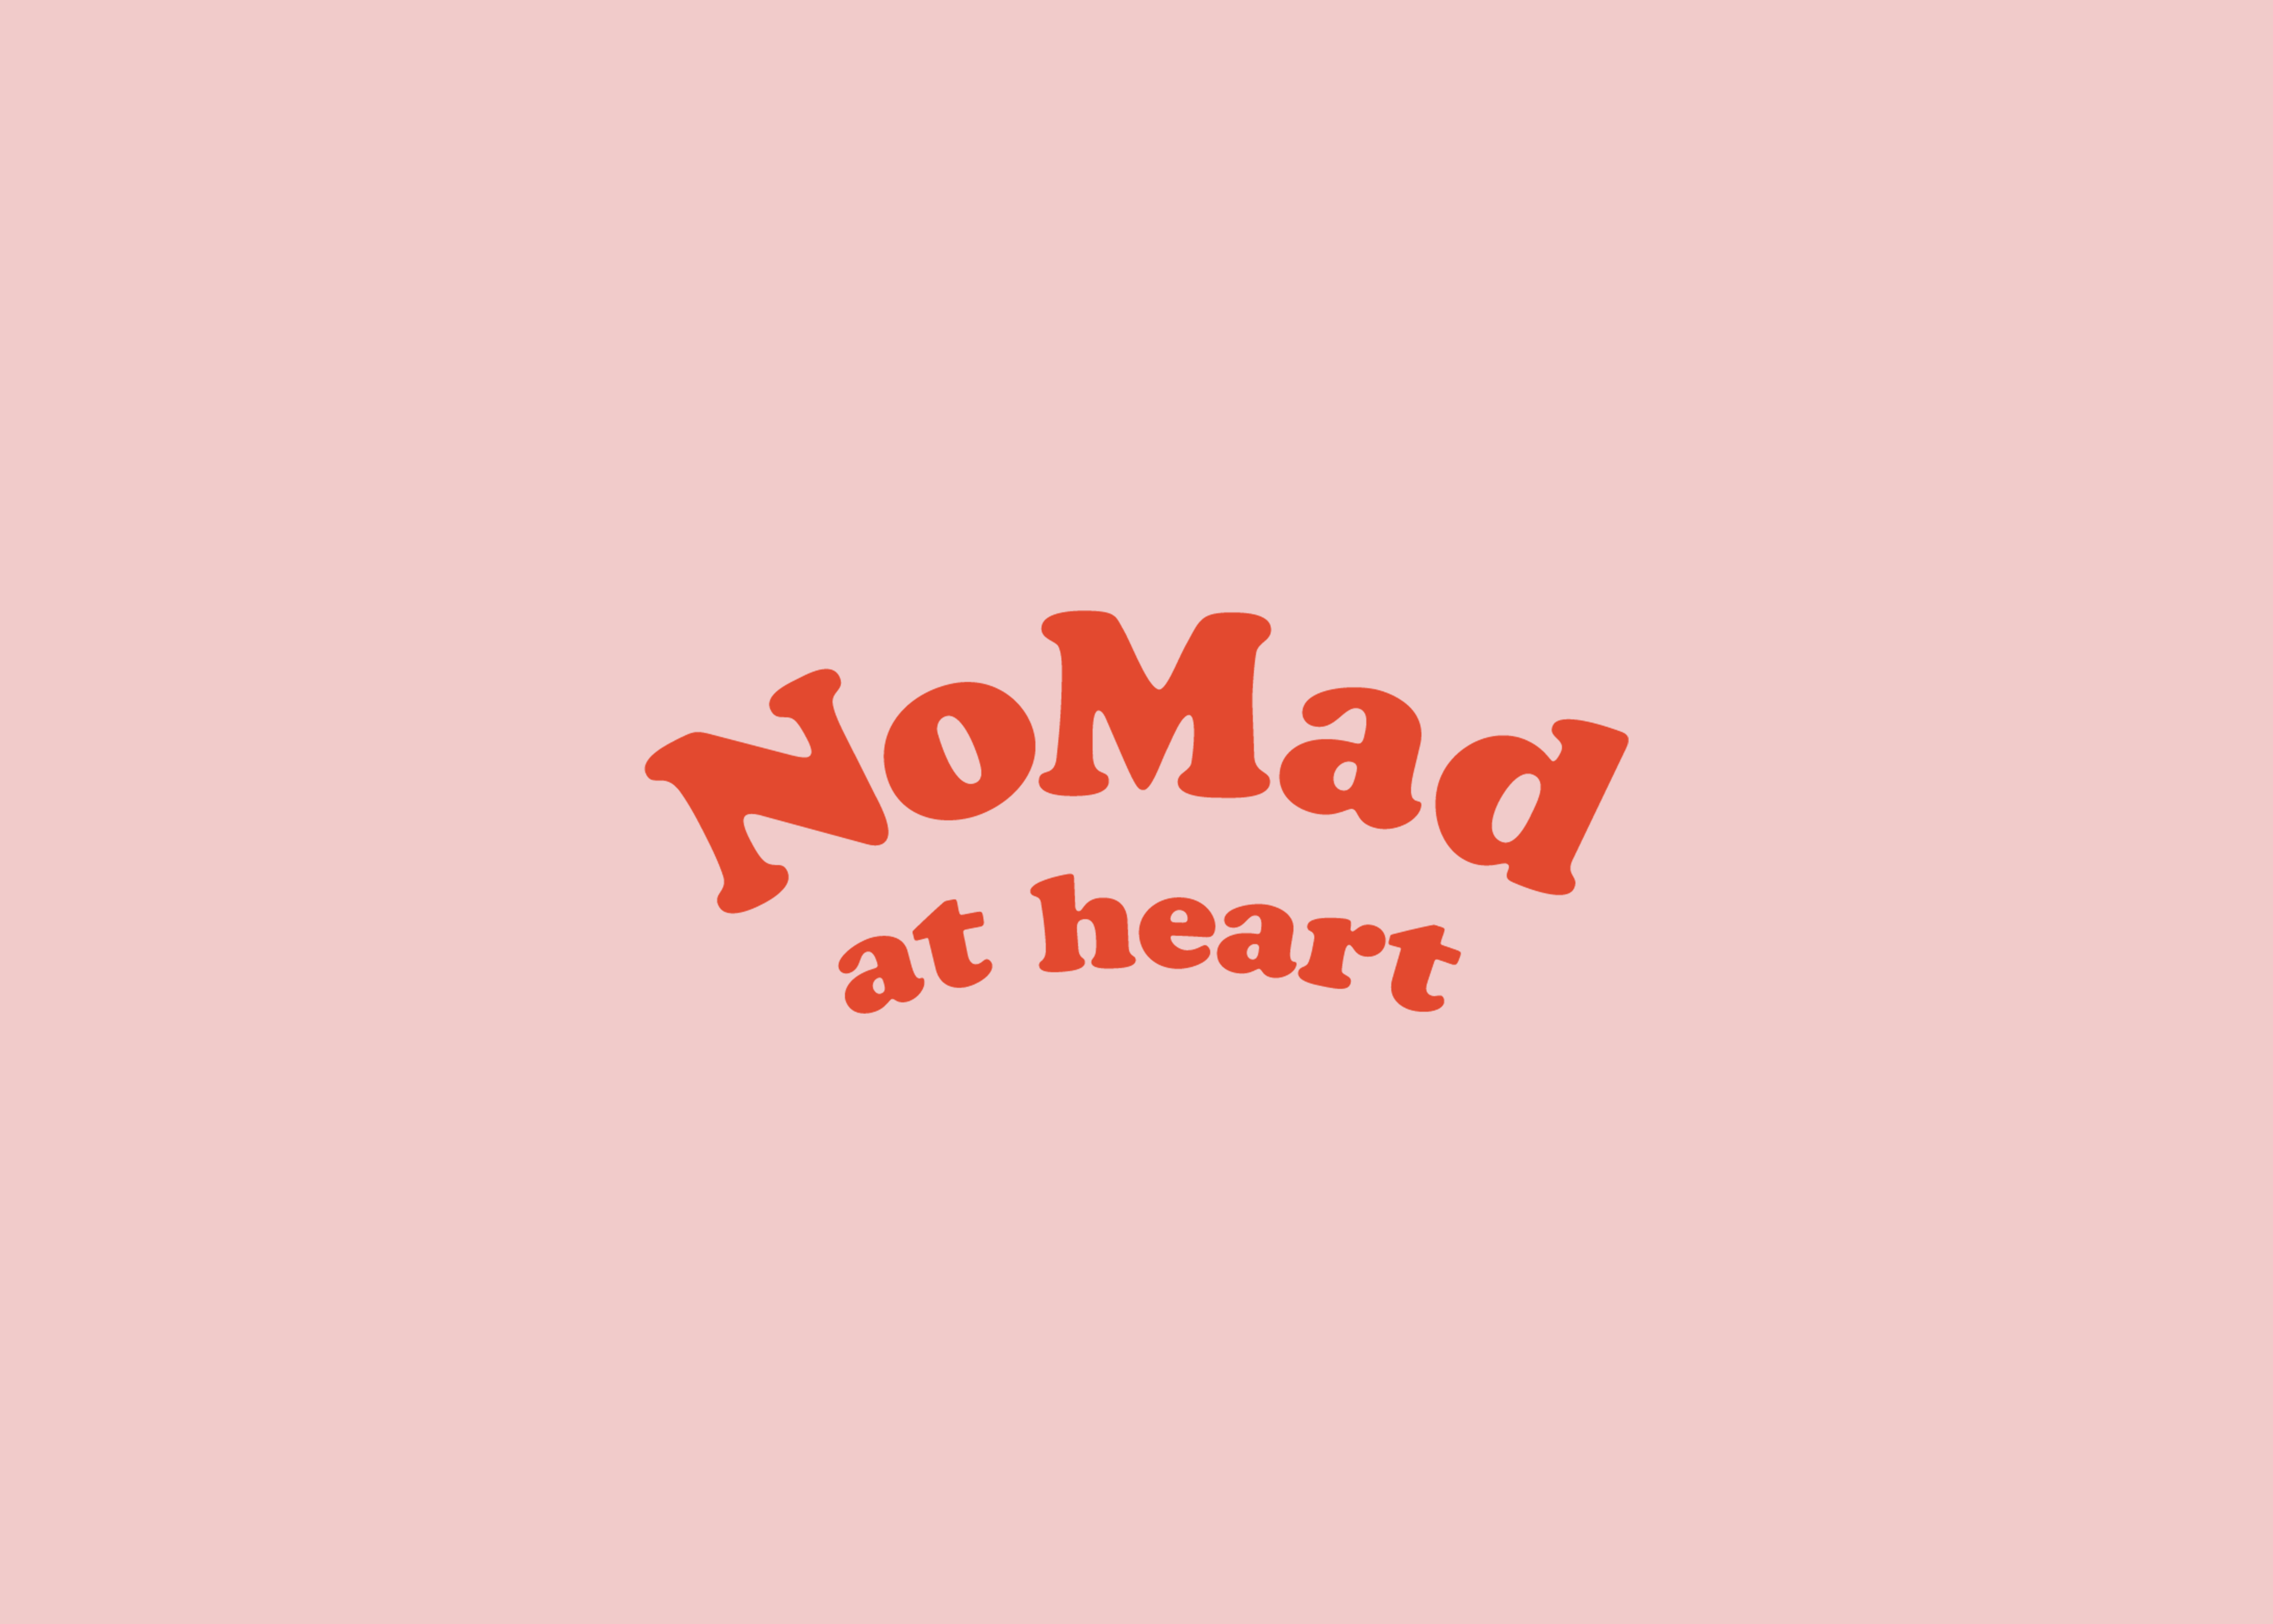 NoMad at heart